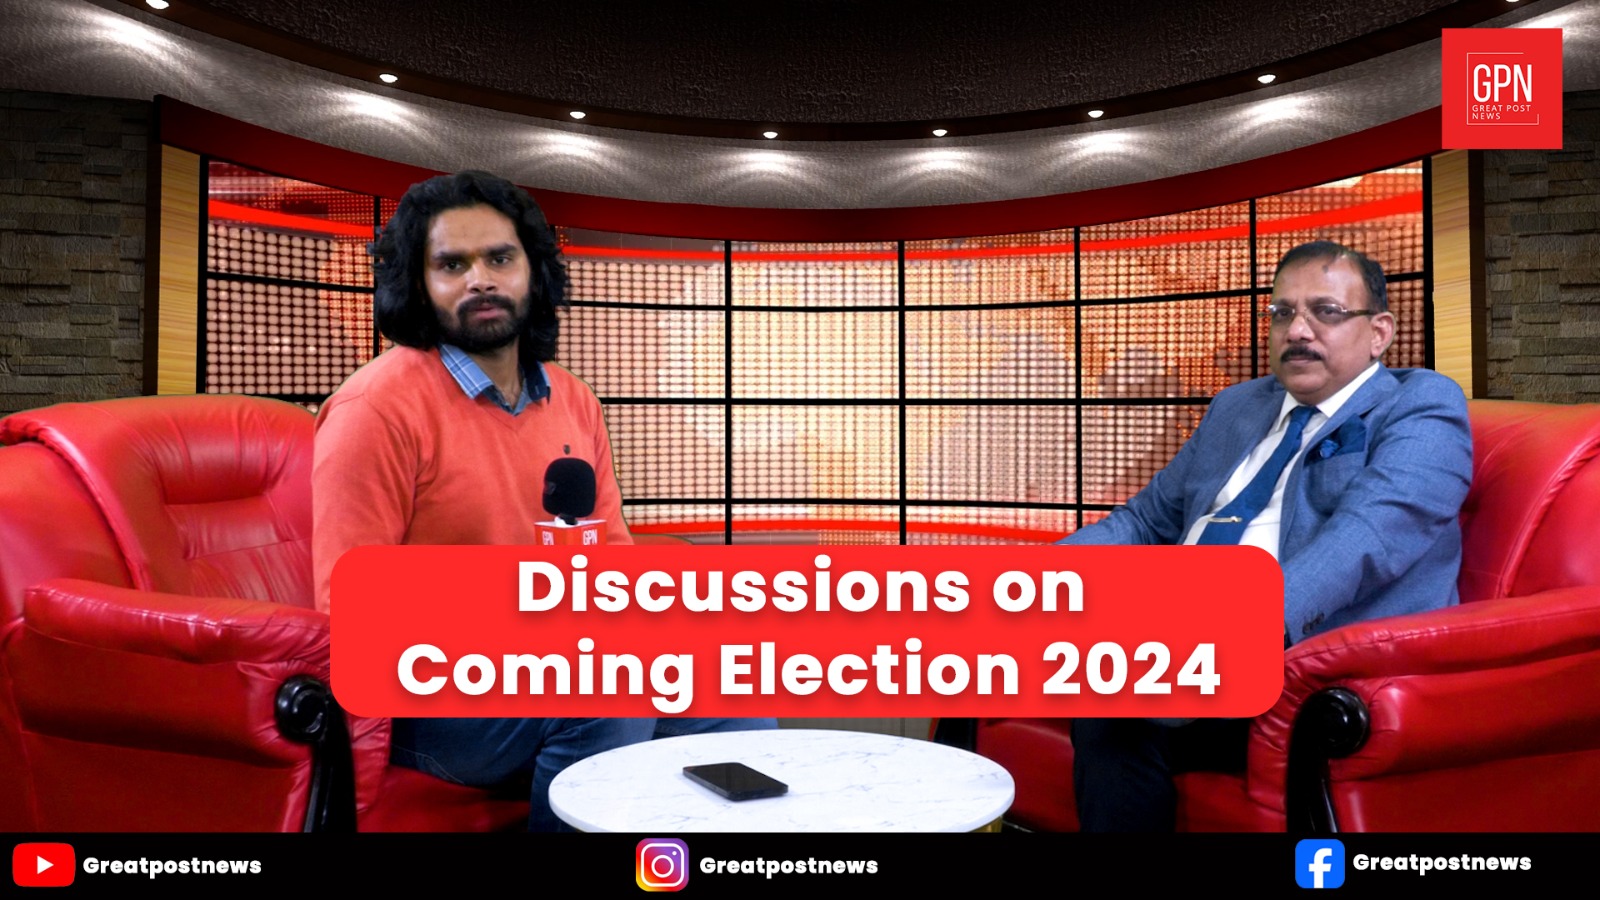 Discussions on Coming Election 2024 | Greatpostnews